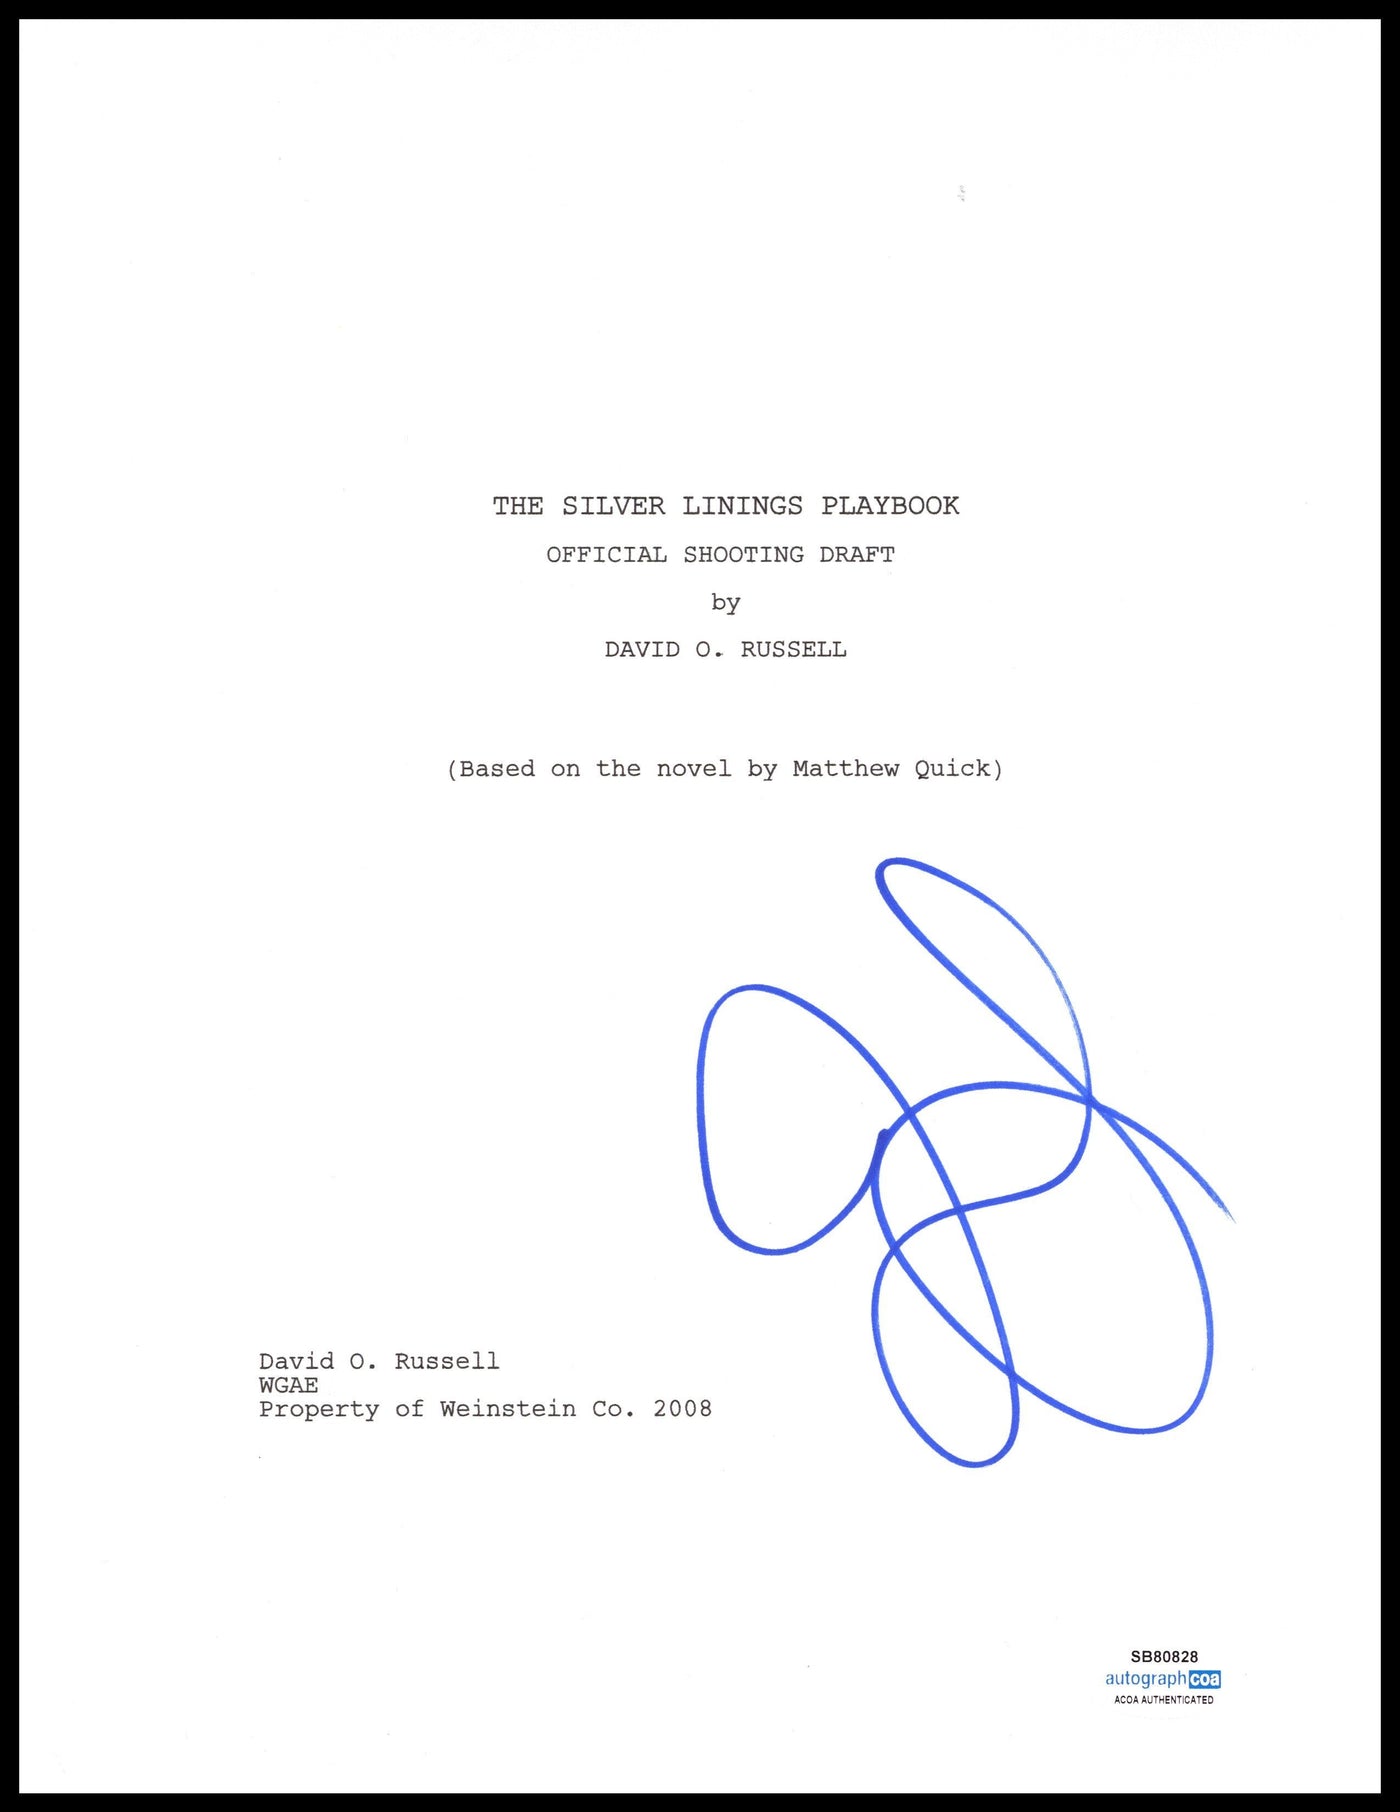 Jennifer Lawrence Signed The Silver Linings Playbook Script Cover AutographCOA #2